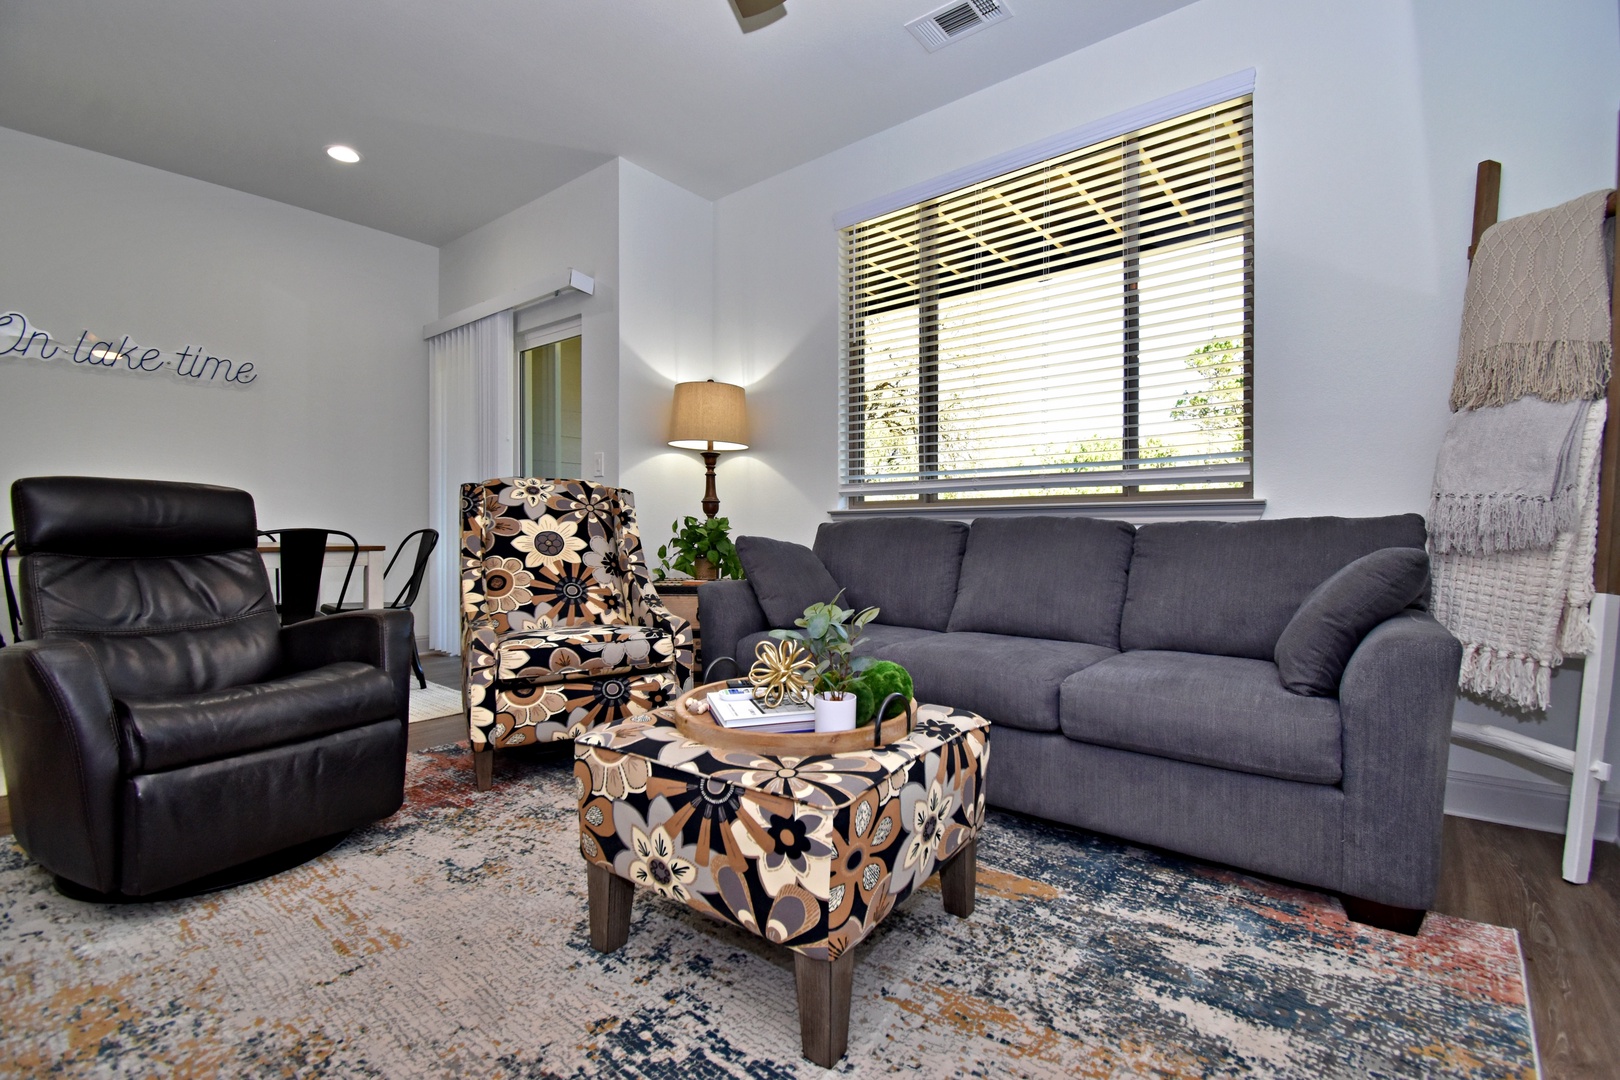 Open living space with ample seating, Smart TV, and patio access